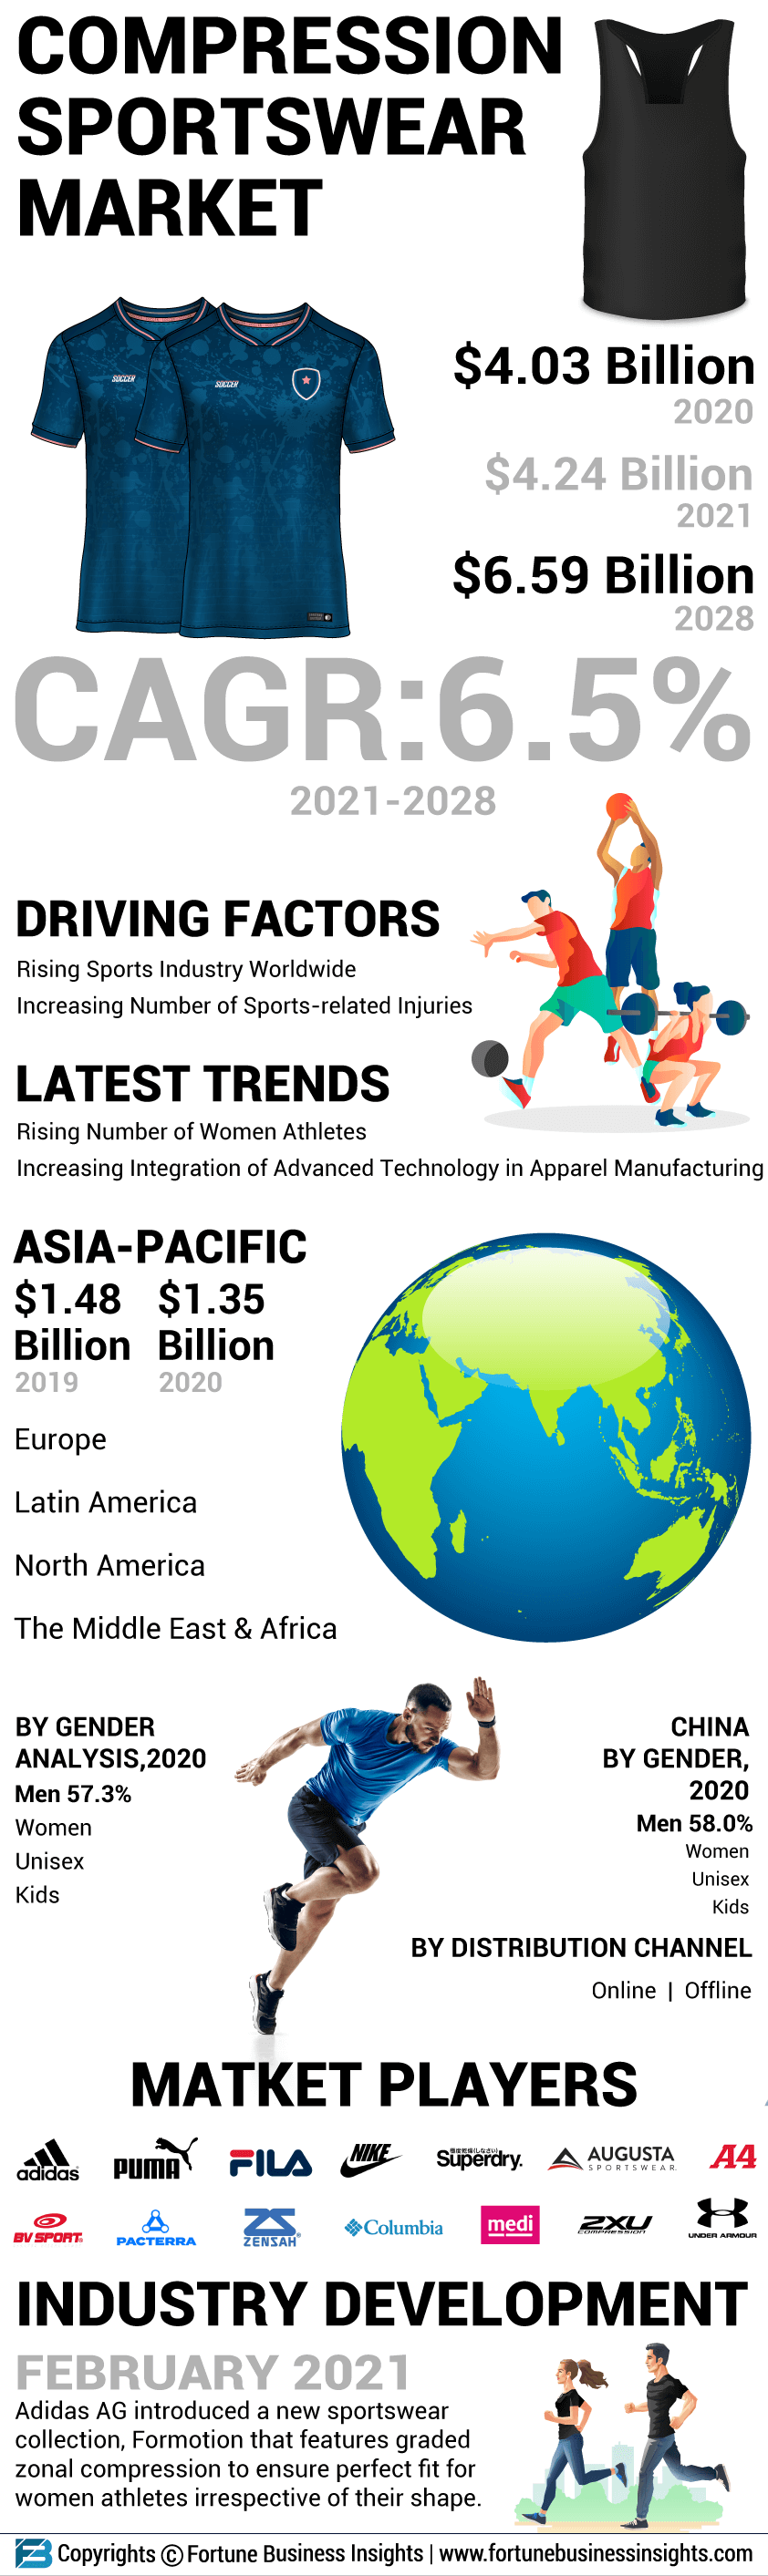 https://www.fortunebusinessinsights.com/infographics/compression-sportswear-market.png